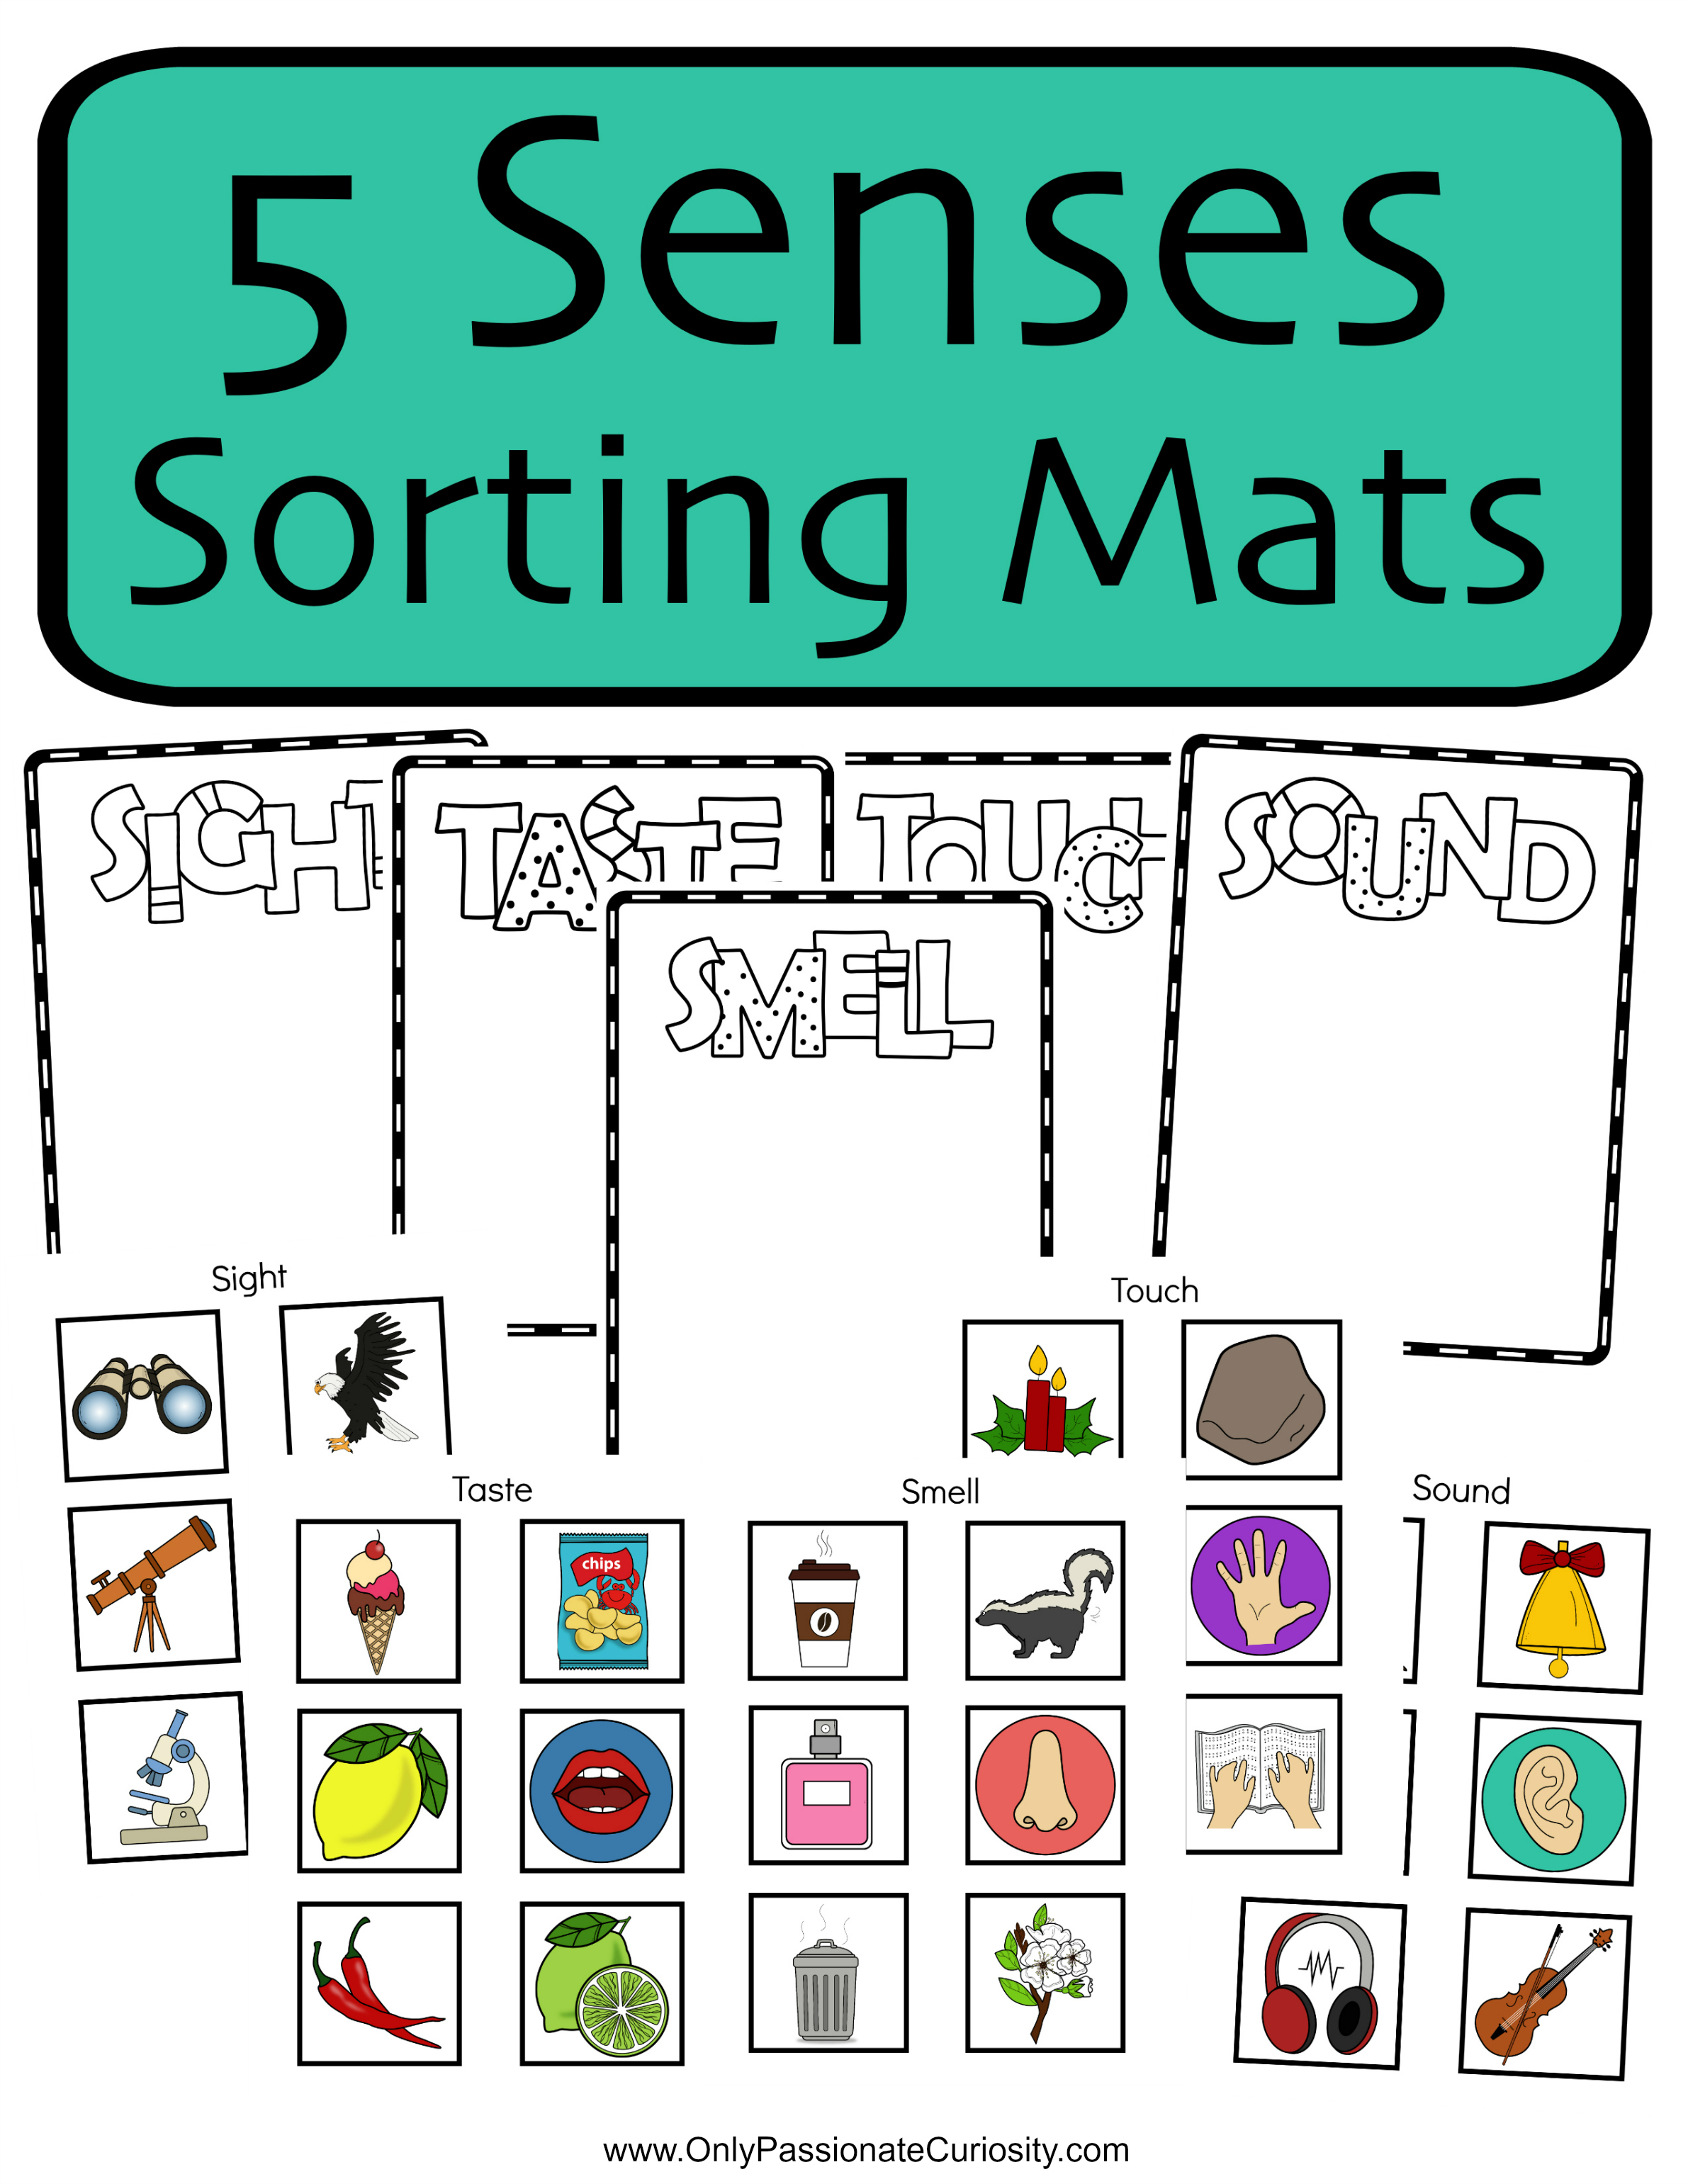 5 Senses Sorting Mats Only Passionate Curiosity